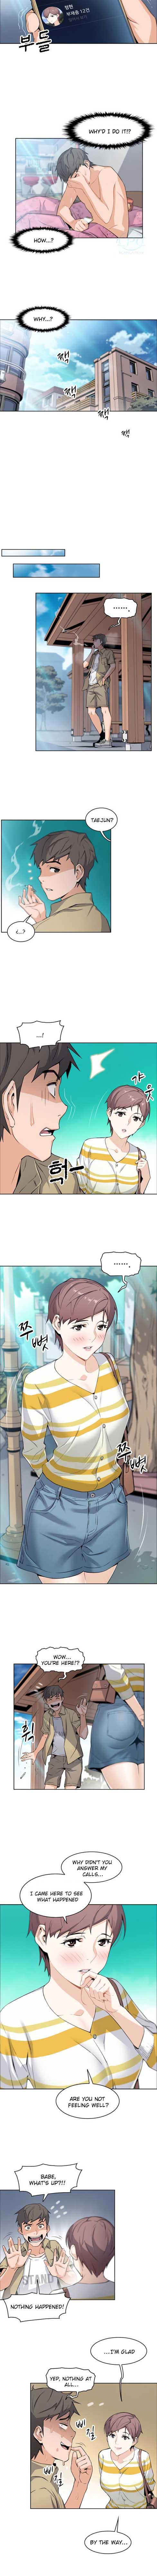 Housekeeper [Neck Pillow, Paper] Ch.49/49 [English] [Manhwa PDF] Completed 23